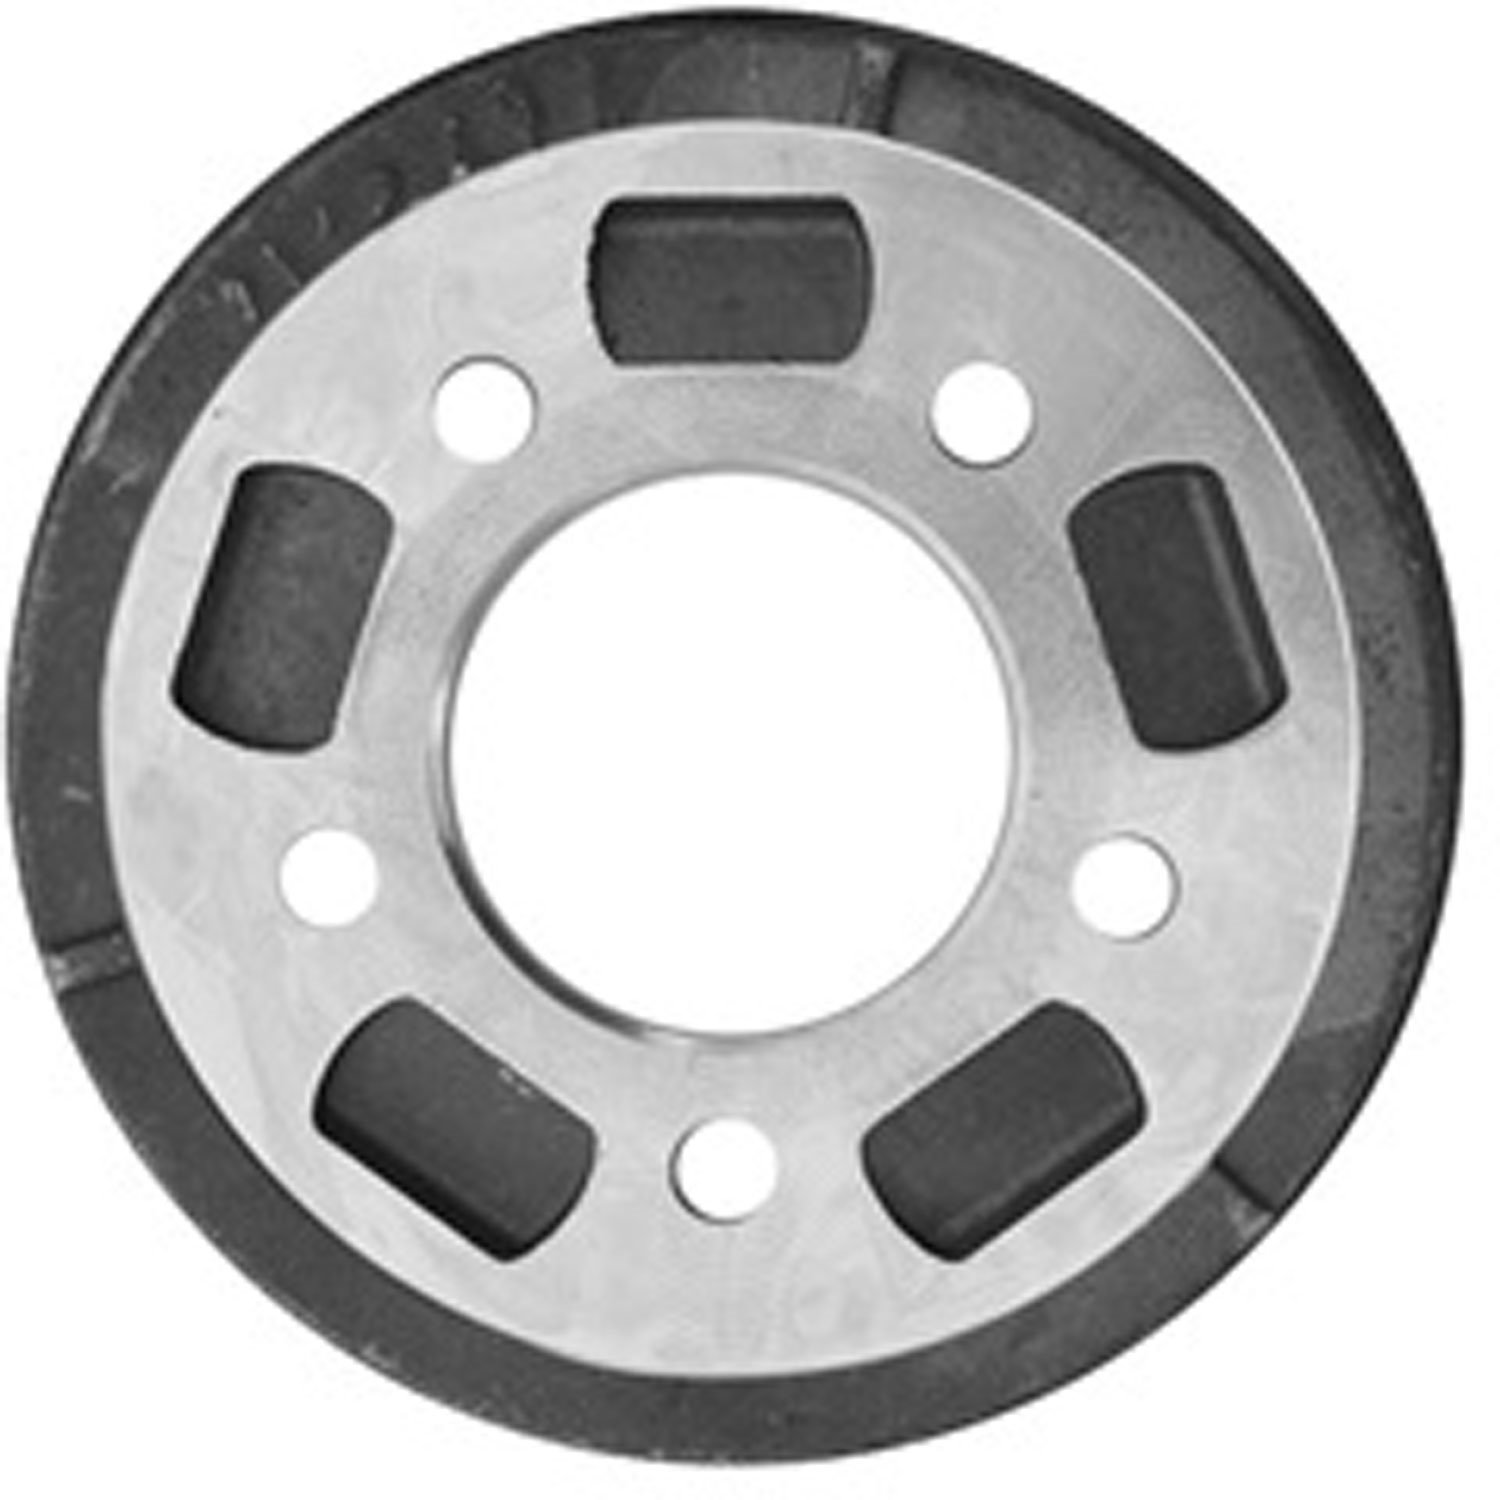 Replacement 9 inch brake drum from Omix-ADA, Fits front or rear axle of Ford GPW and Willys MB CJ2A and CJ3A.